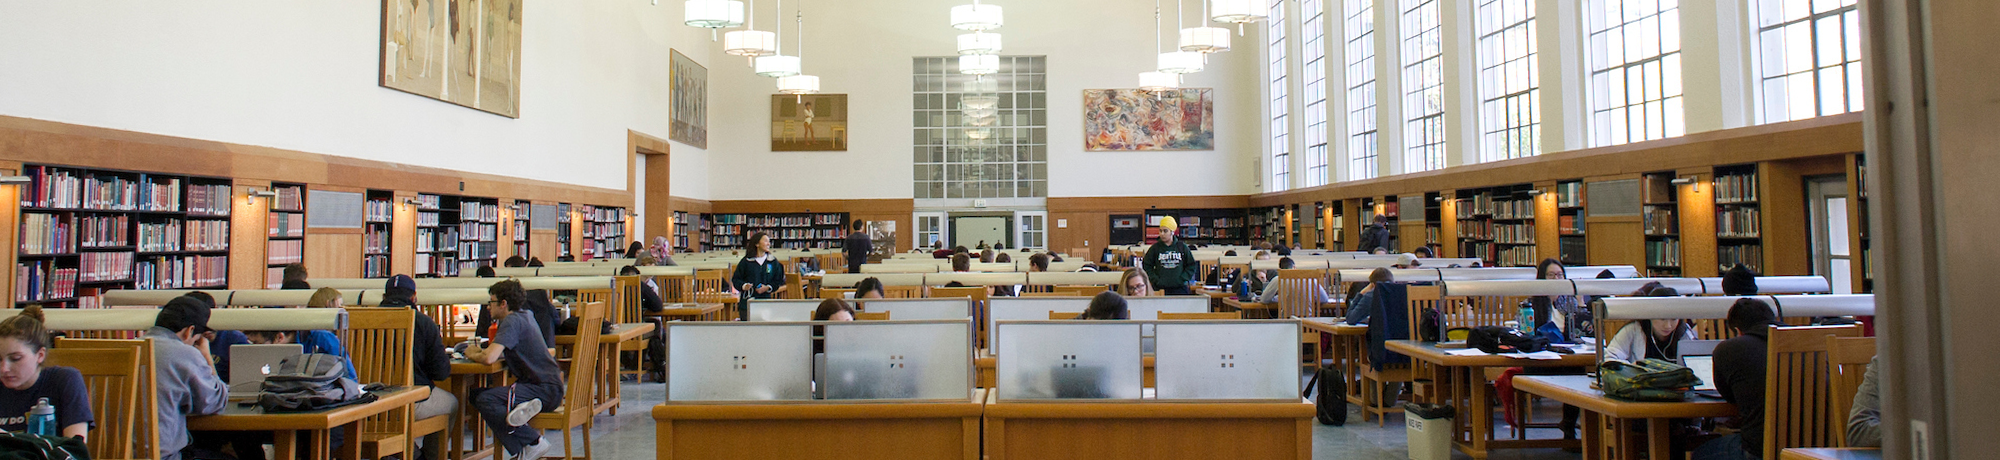 Students study in the Shields Library for finals on March 18, 2018.  The library sees a steep climb in usage during finals.